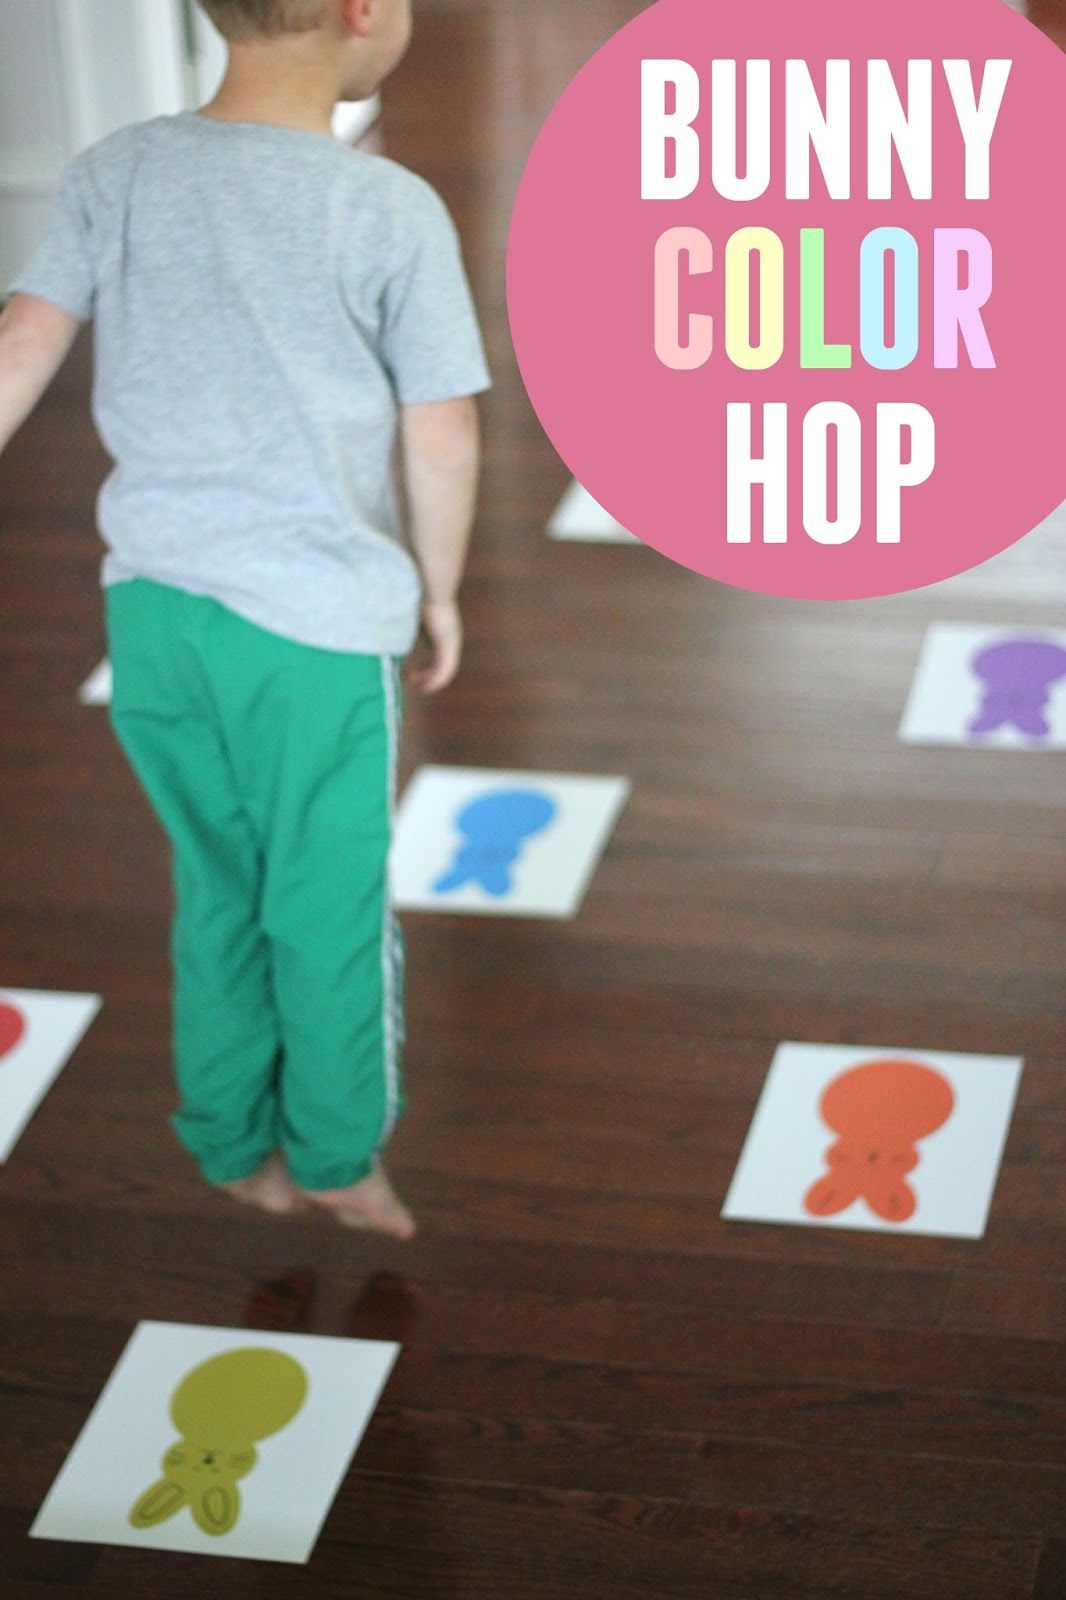 Toddler Approved!: Bunny Color Hop for Toddlers and Preschoolers